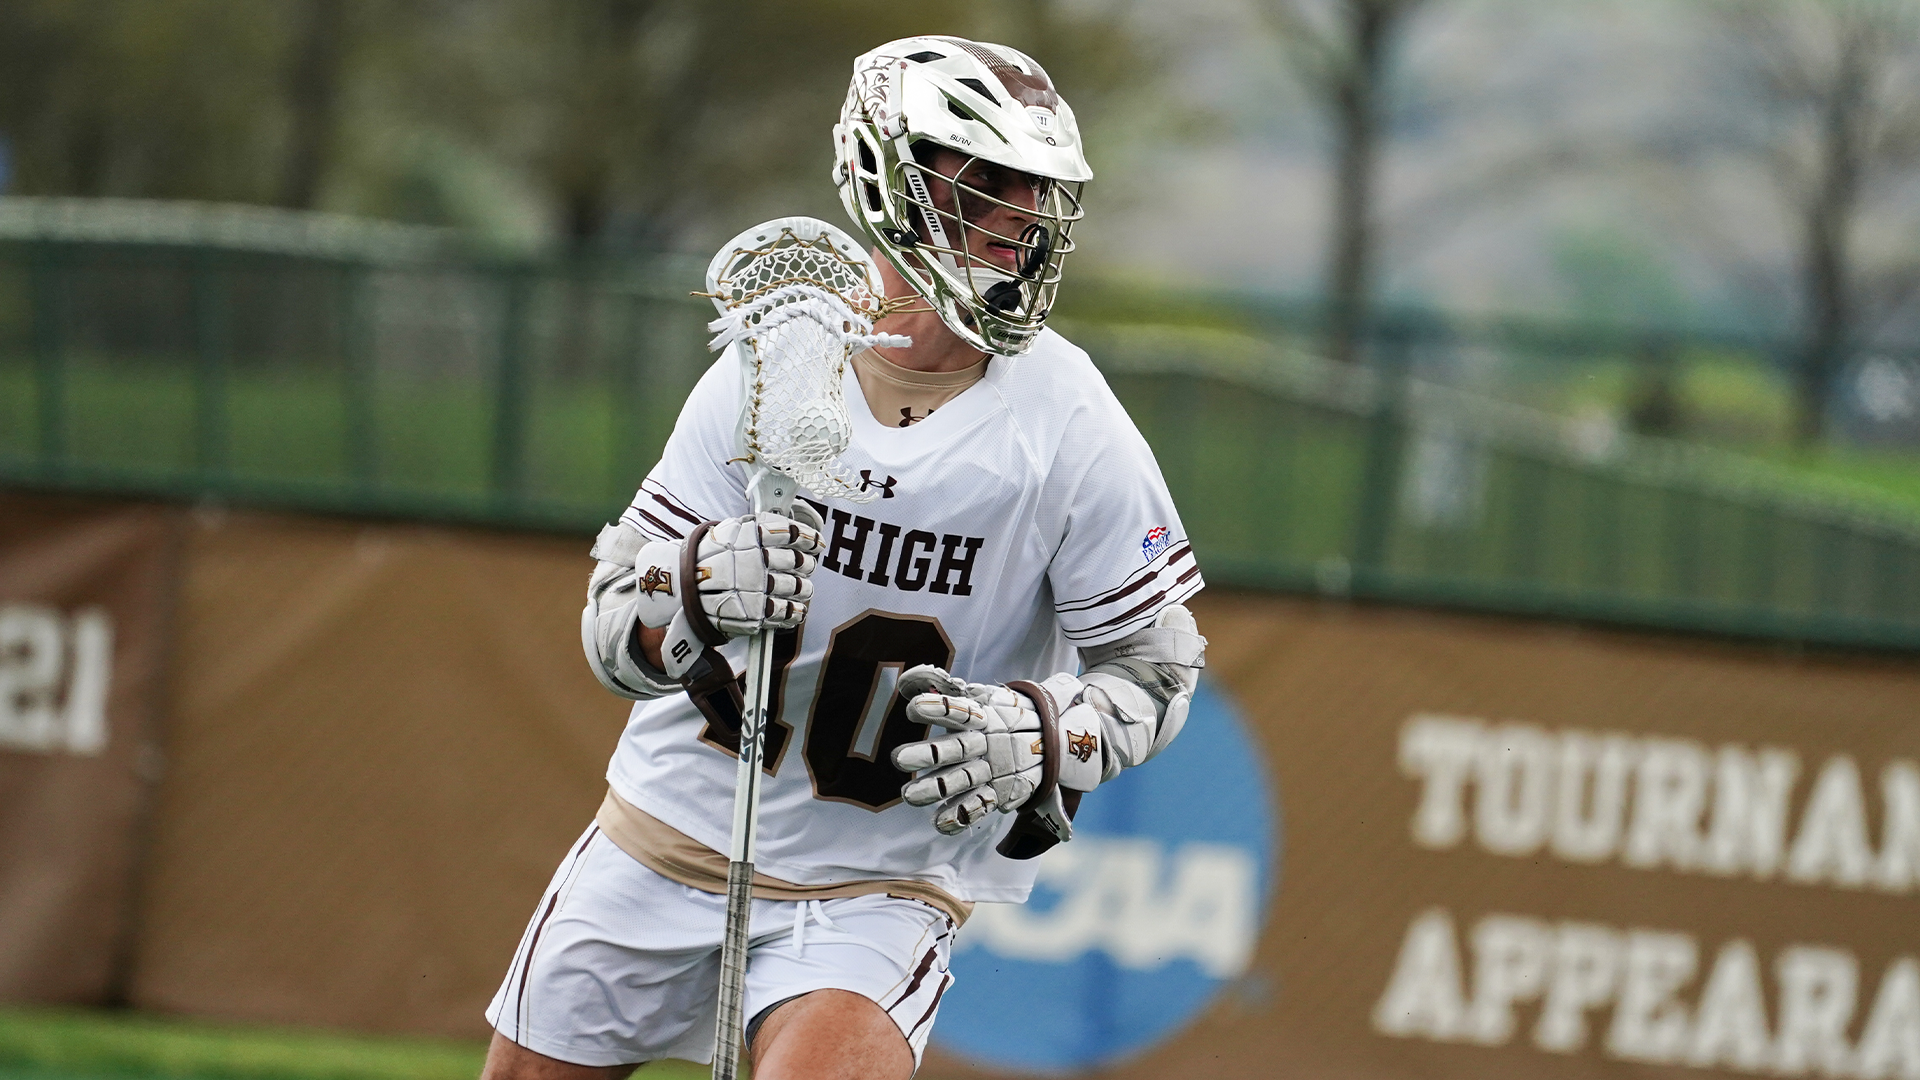 Lehigh attacker Scott Cole carrying the ball with his right hand.